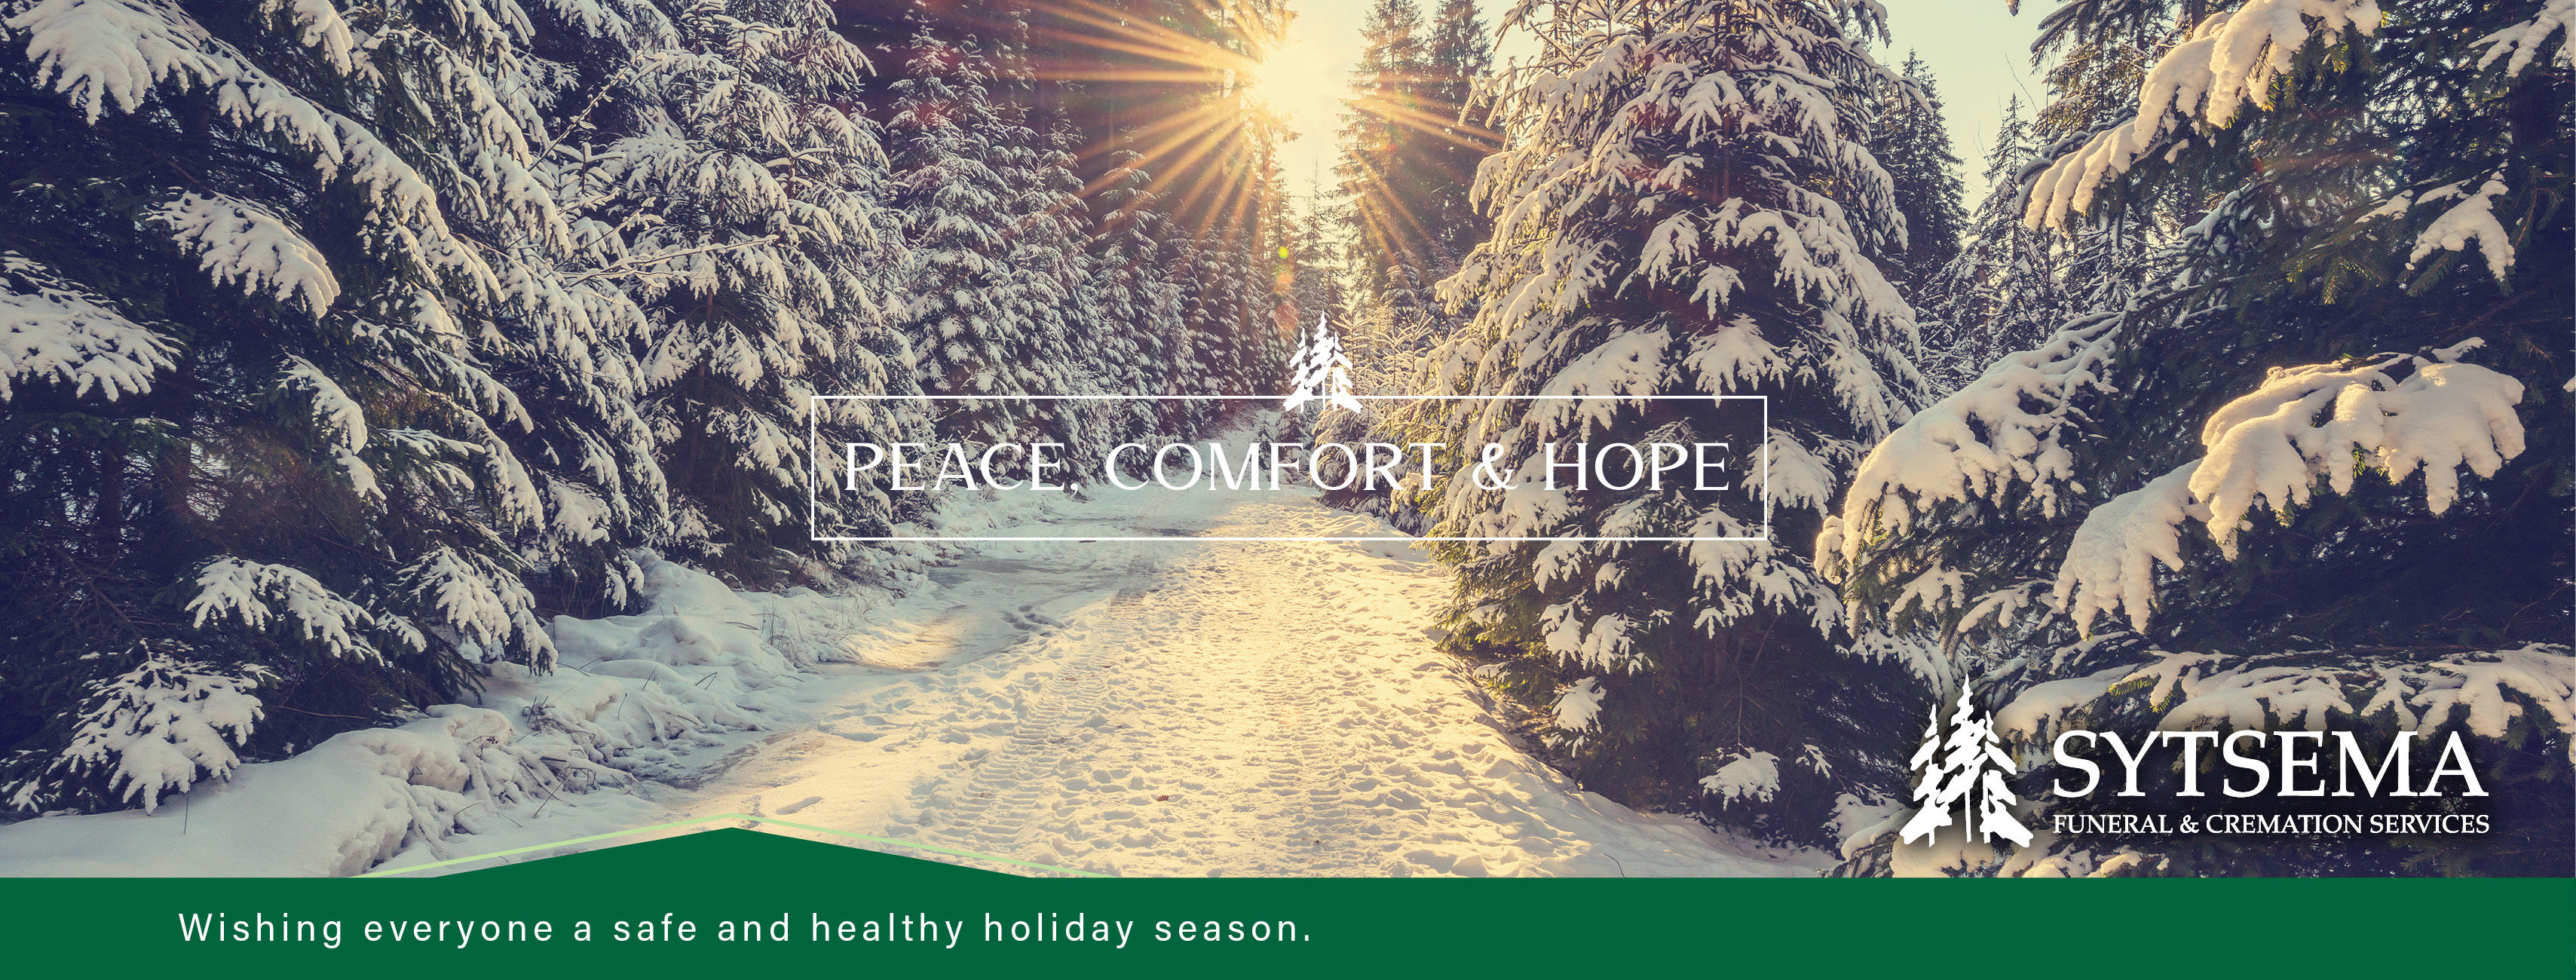 Wishing you a safe and healthy holiday season.